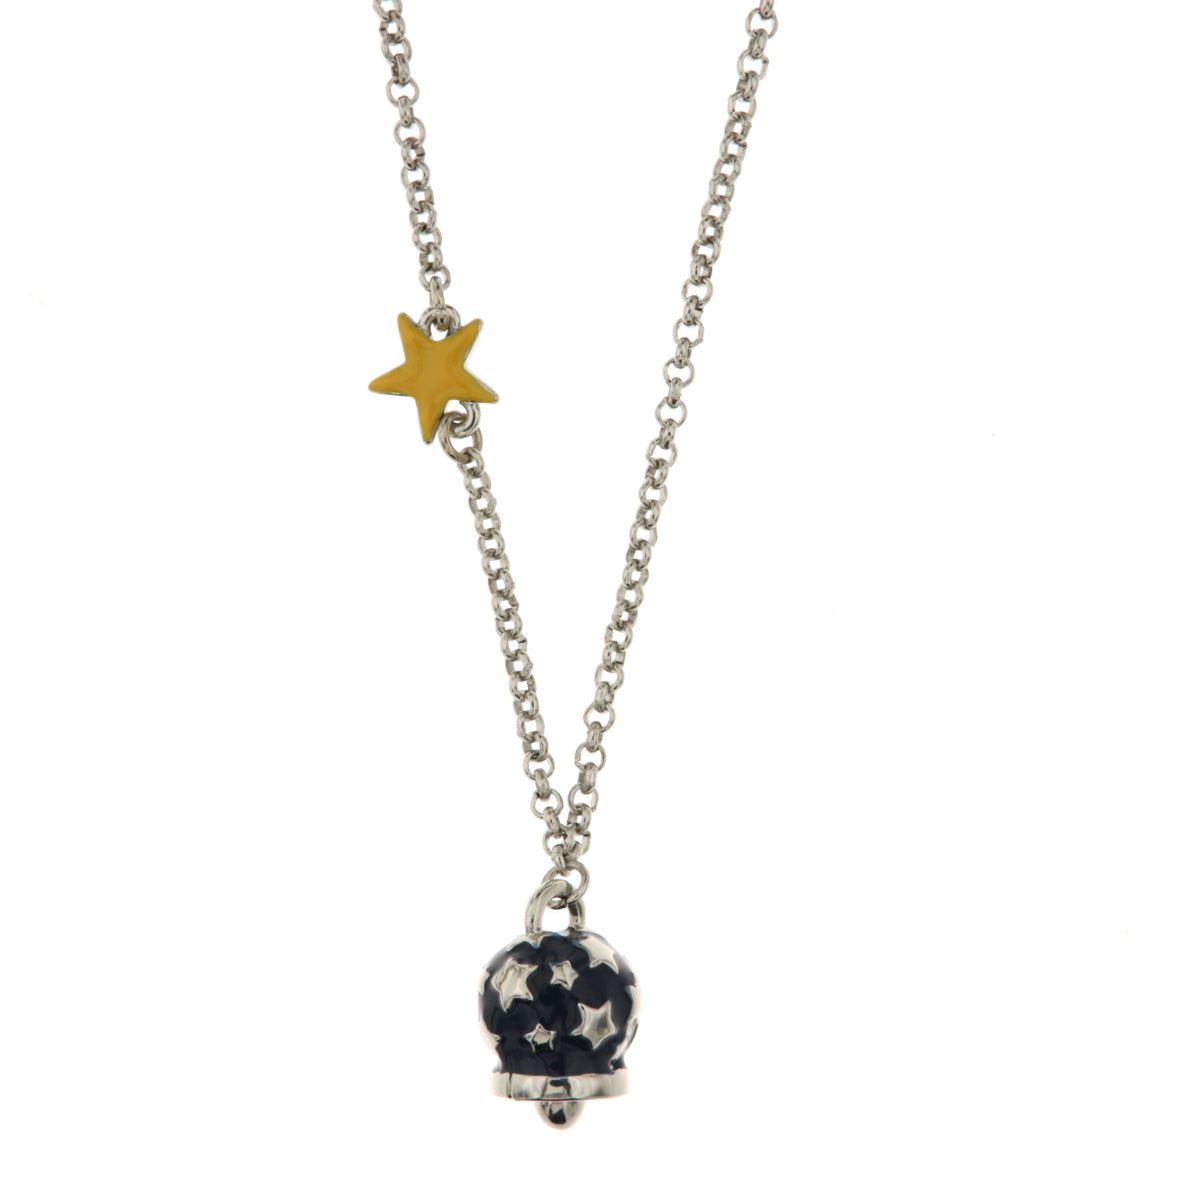 Metal necklace with star detail and bell sinkhole starring sky, with blue enamel